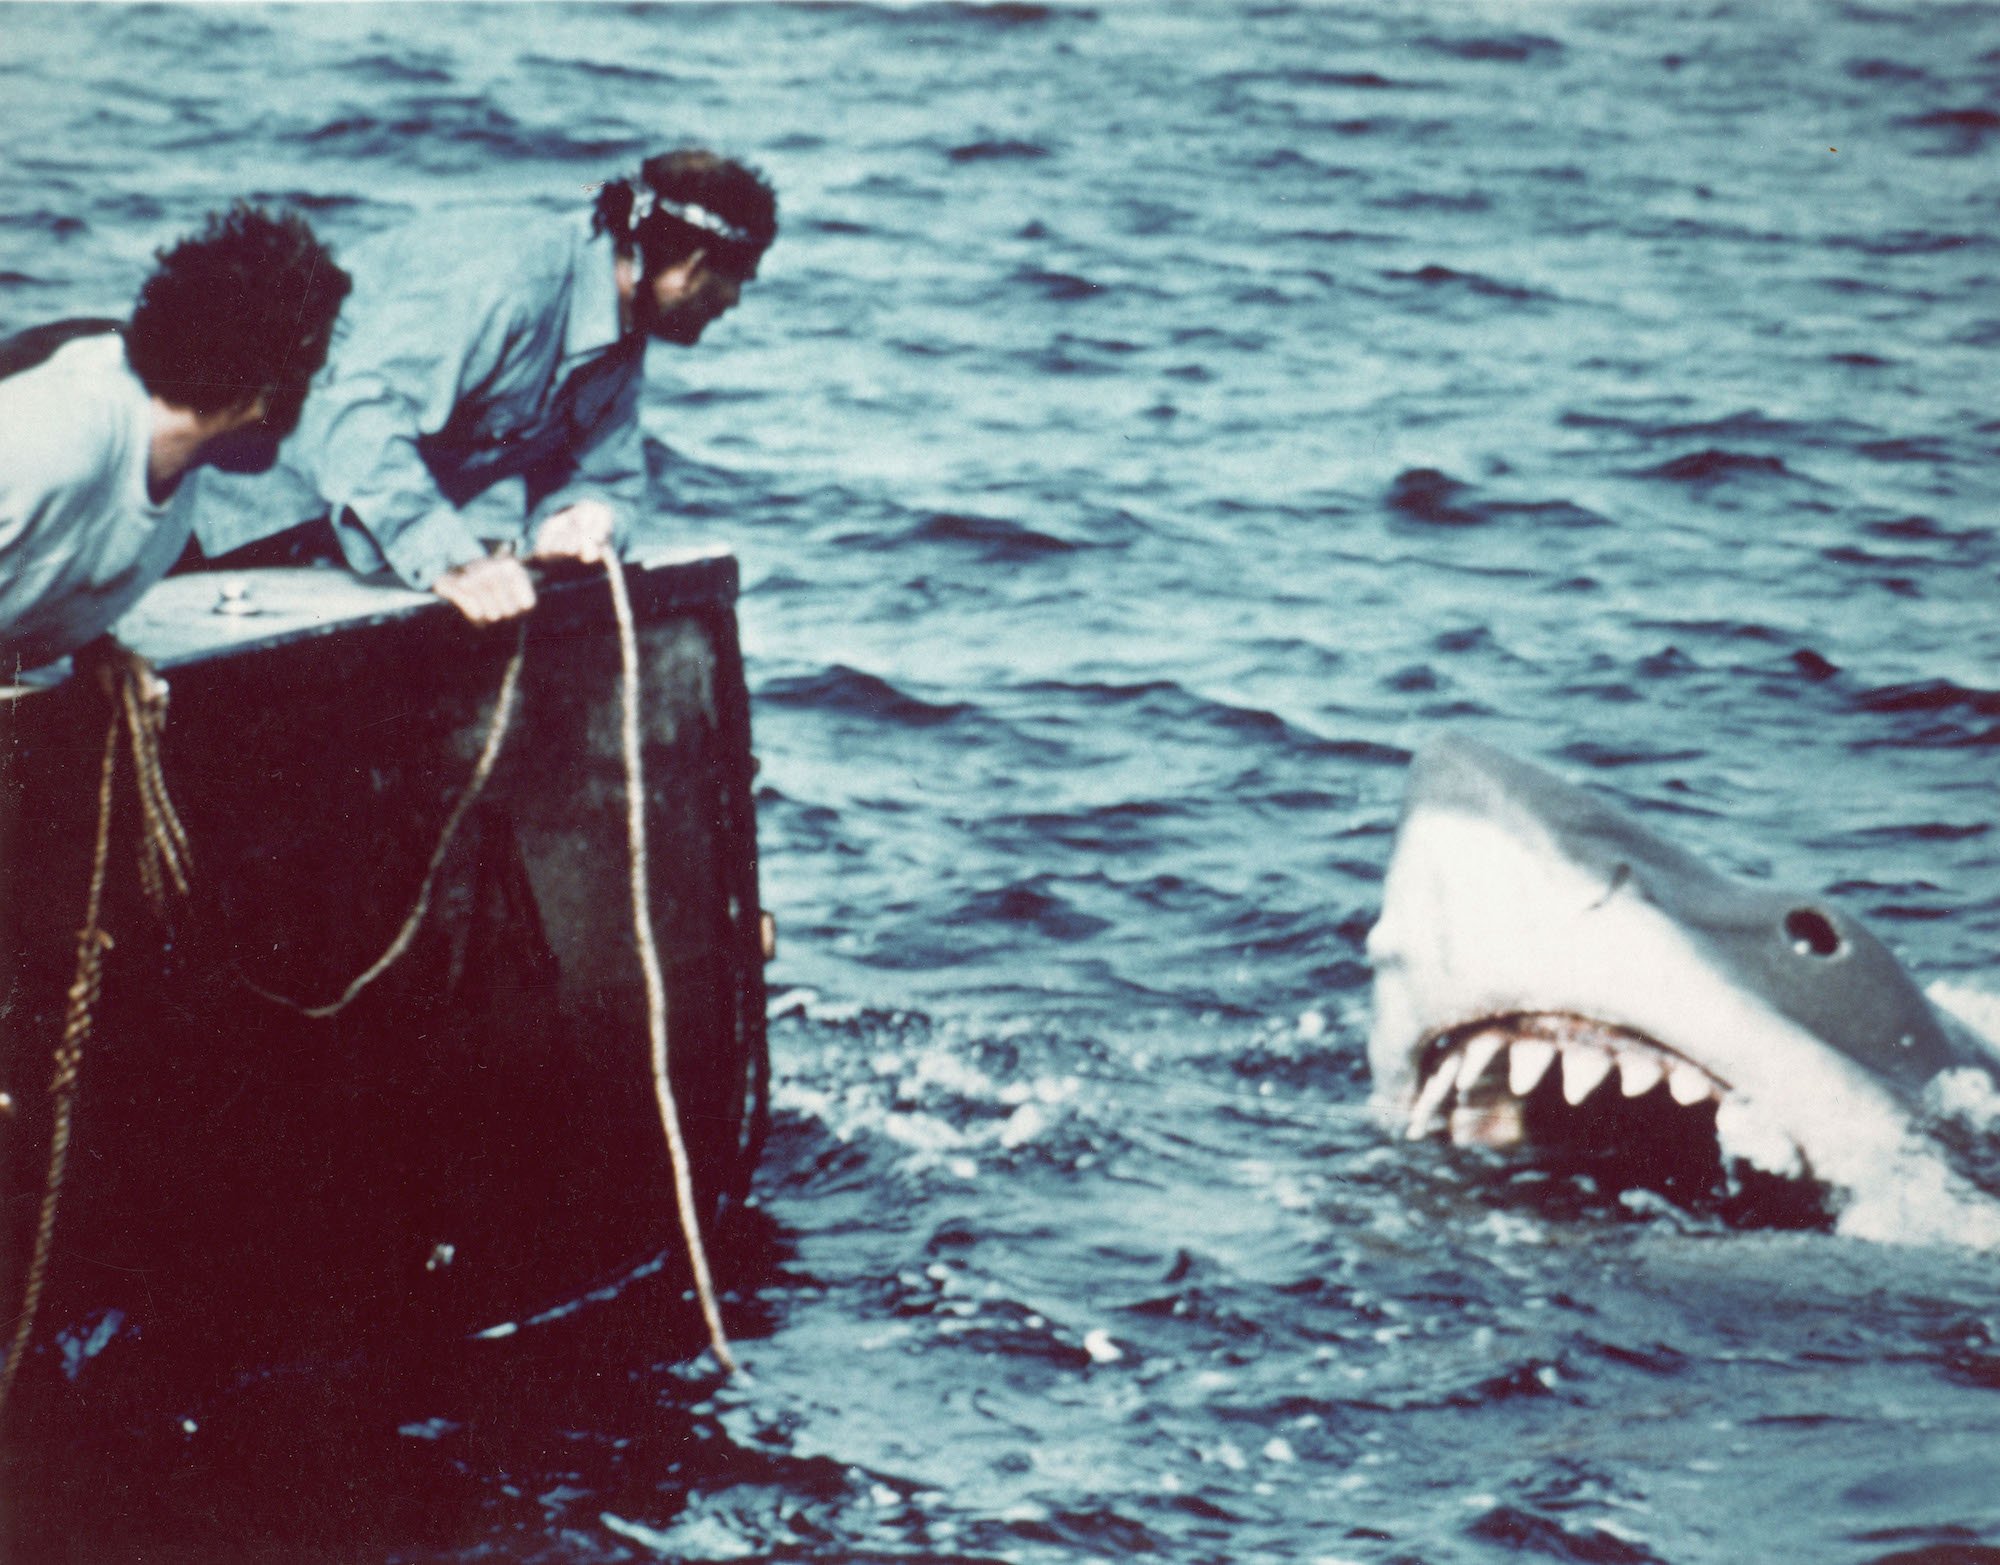 Richard Drewfuss and Robert Shaw in a boat next to a mechanical shark in the water in a scene from 'Jaws'